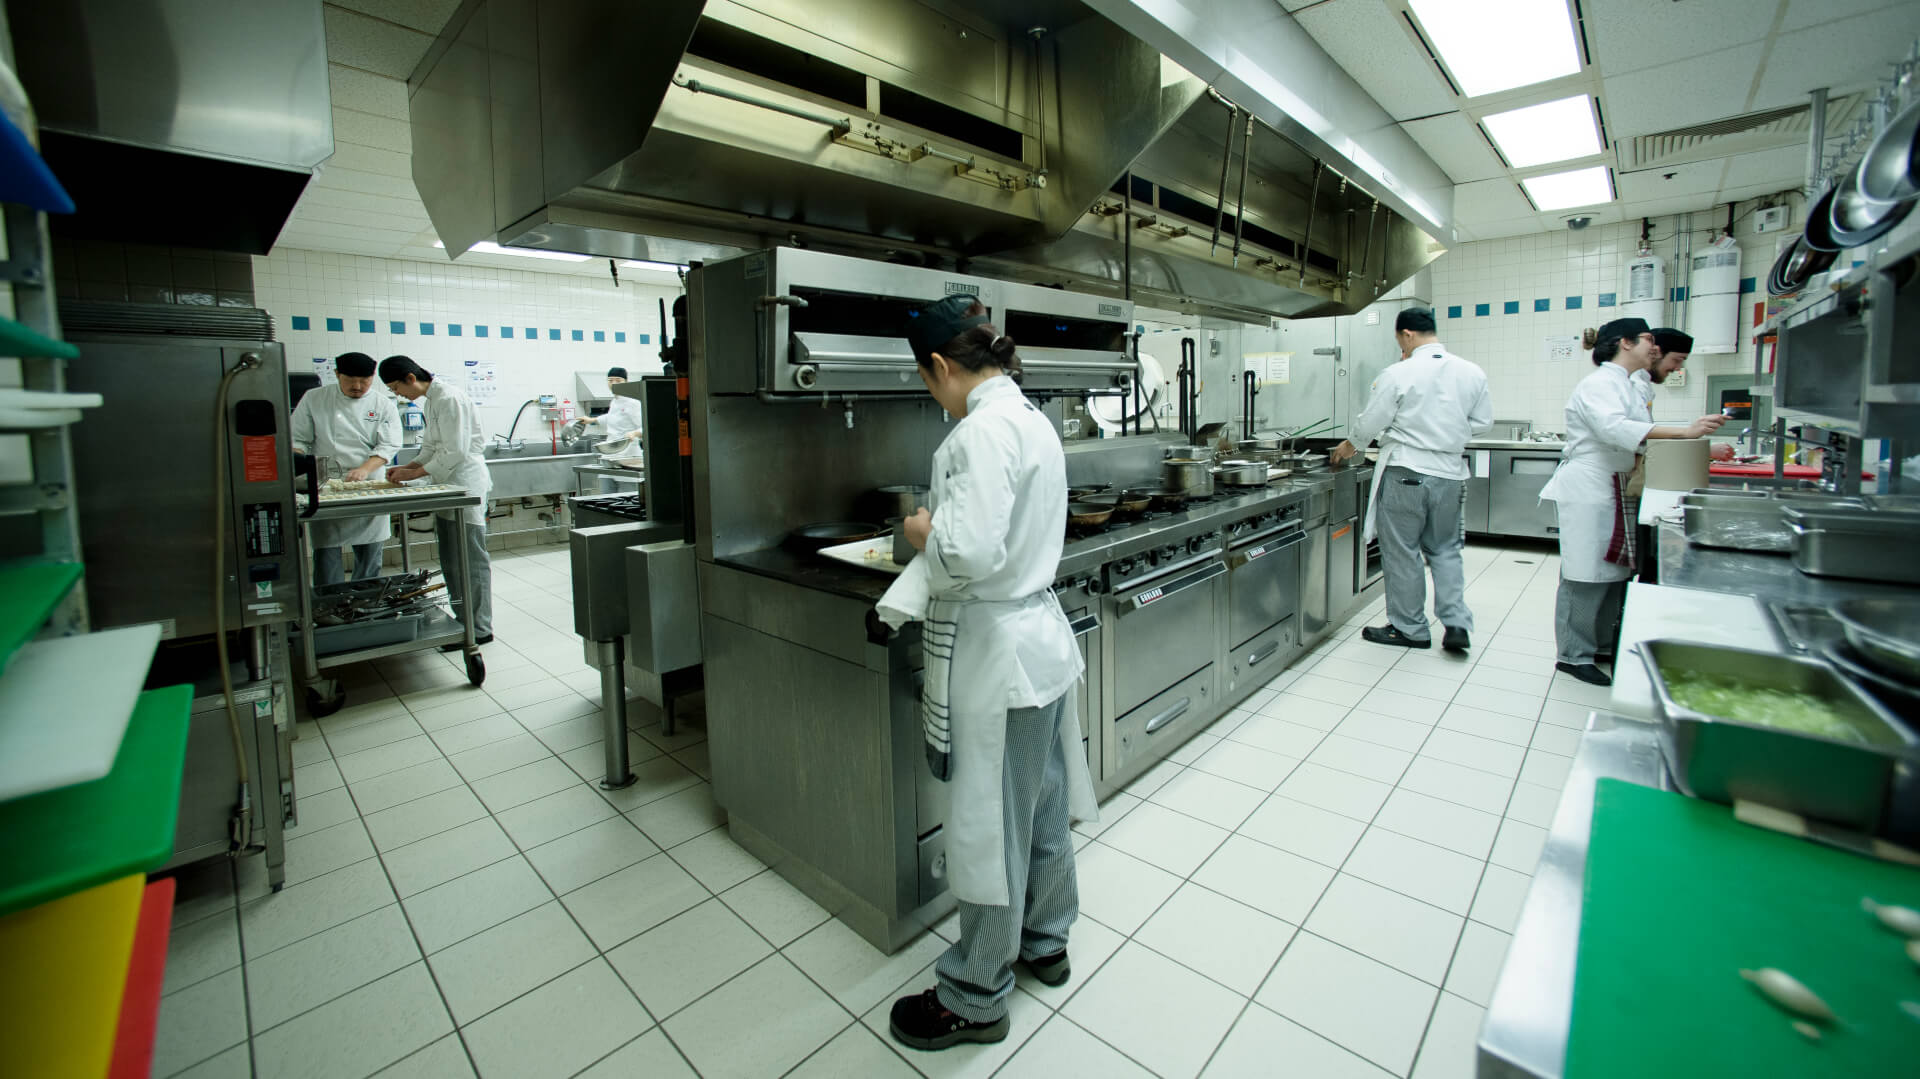 Students training in culinary arts work in unison in the well-equipped kitchen of a culinary school.